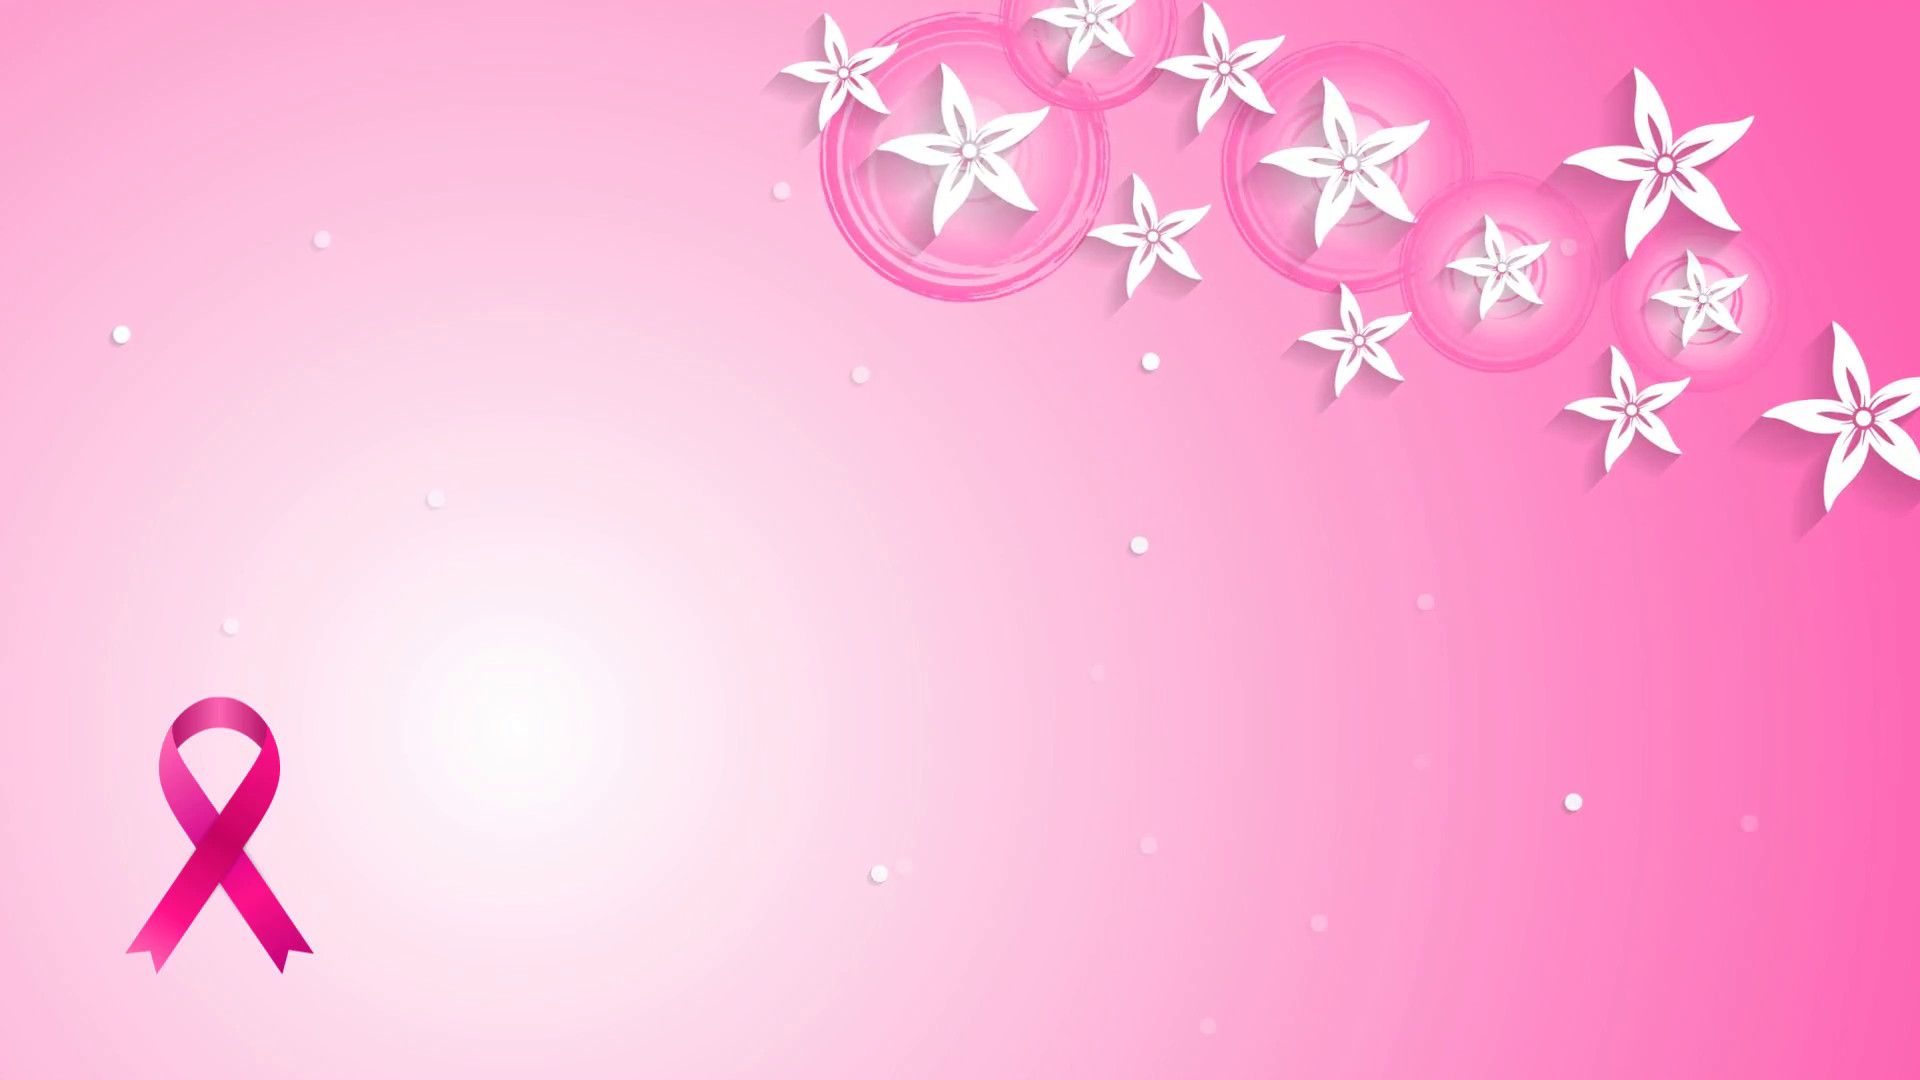 Breast Cancer Ribbon Wallpaper 43 images